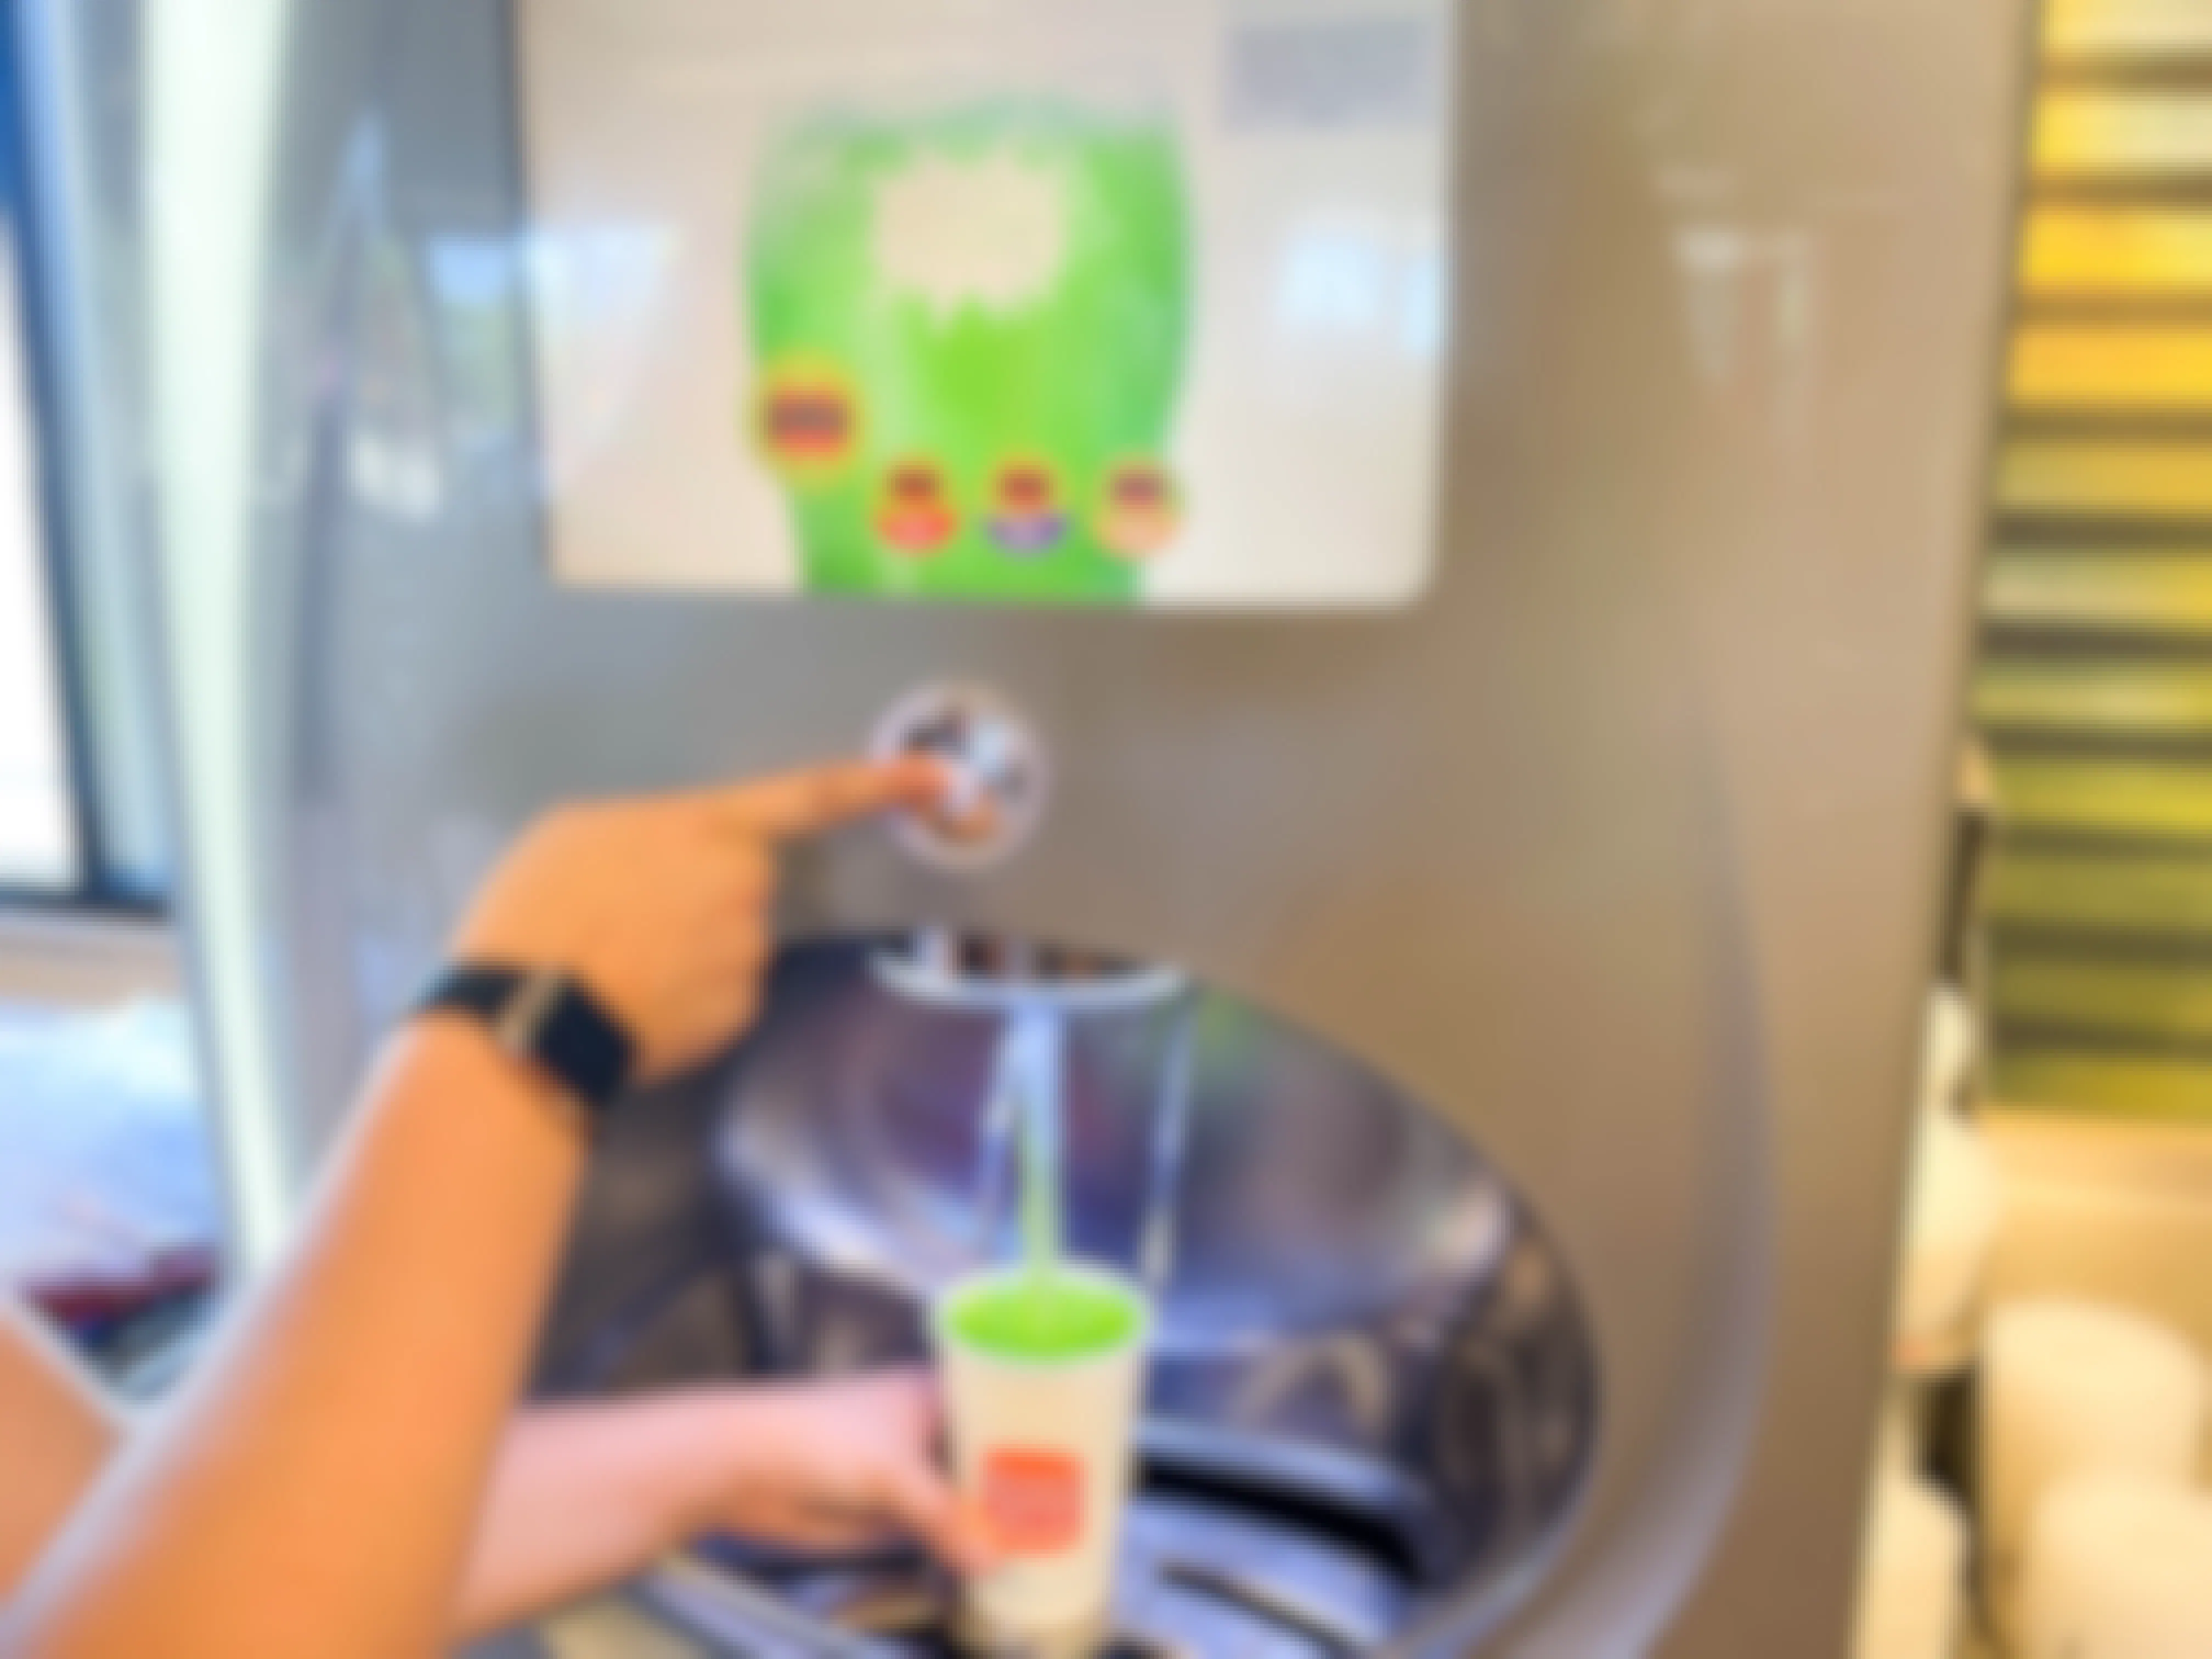 a person refilling burger king cup with surge soda